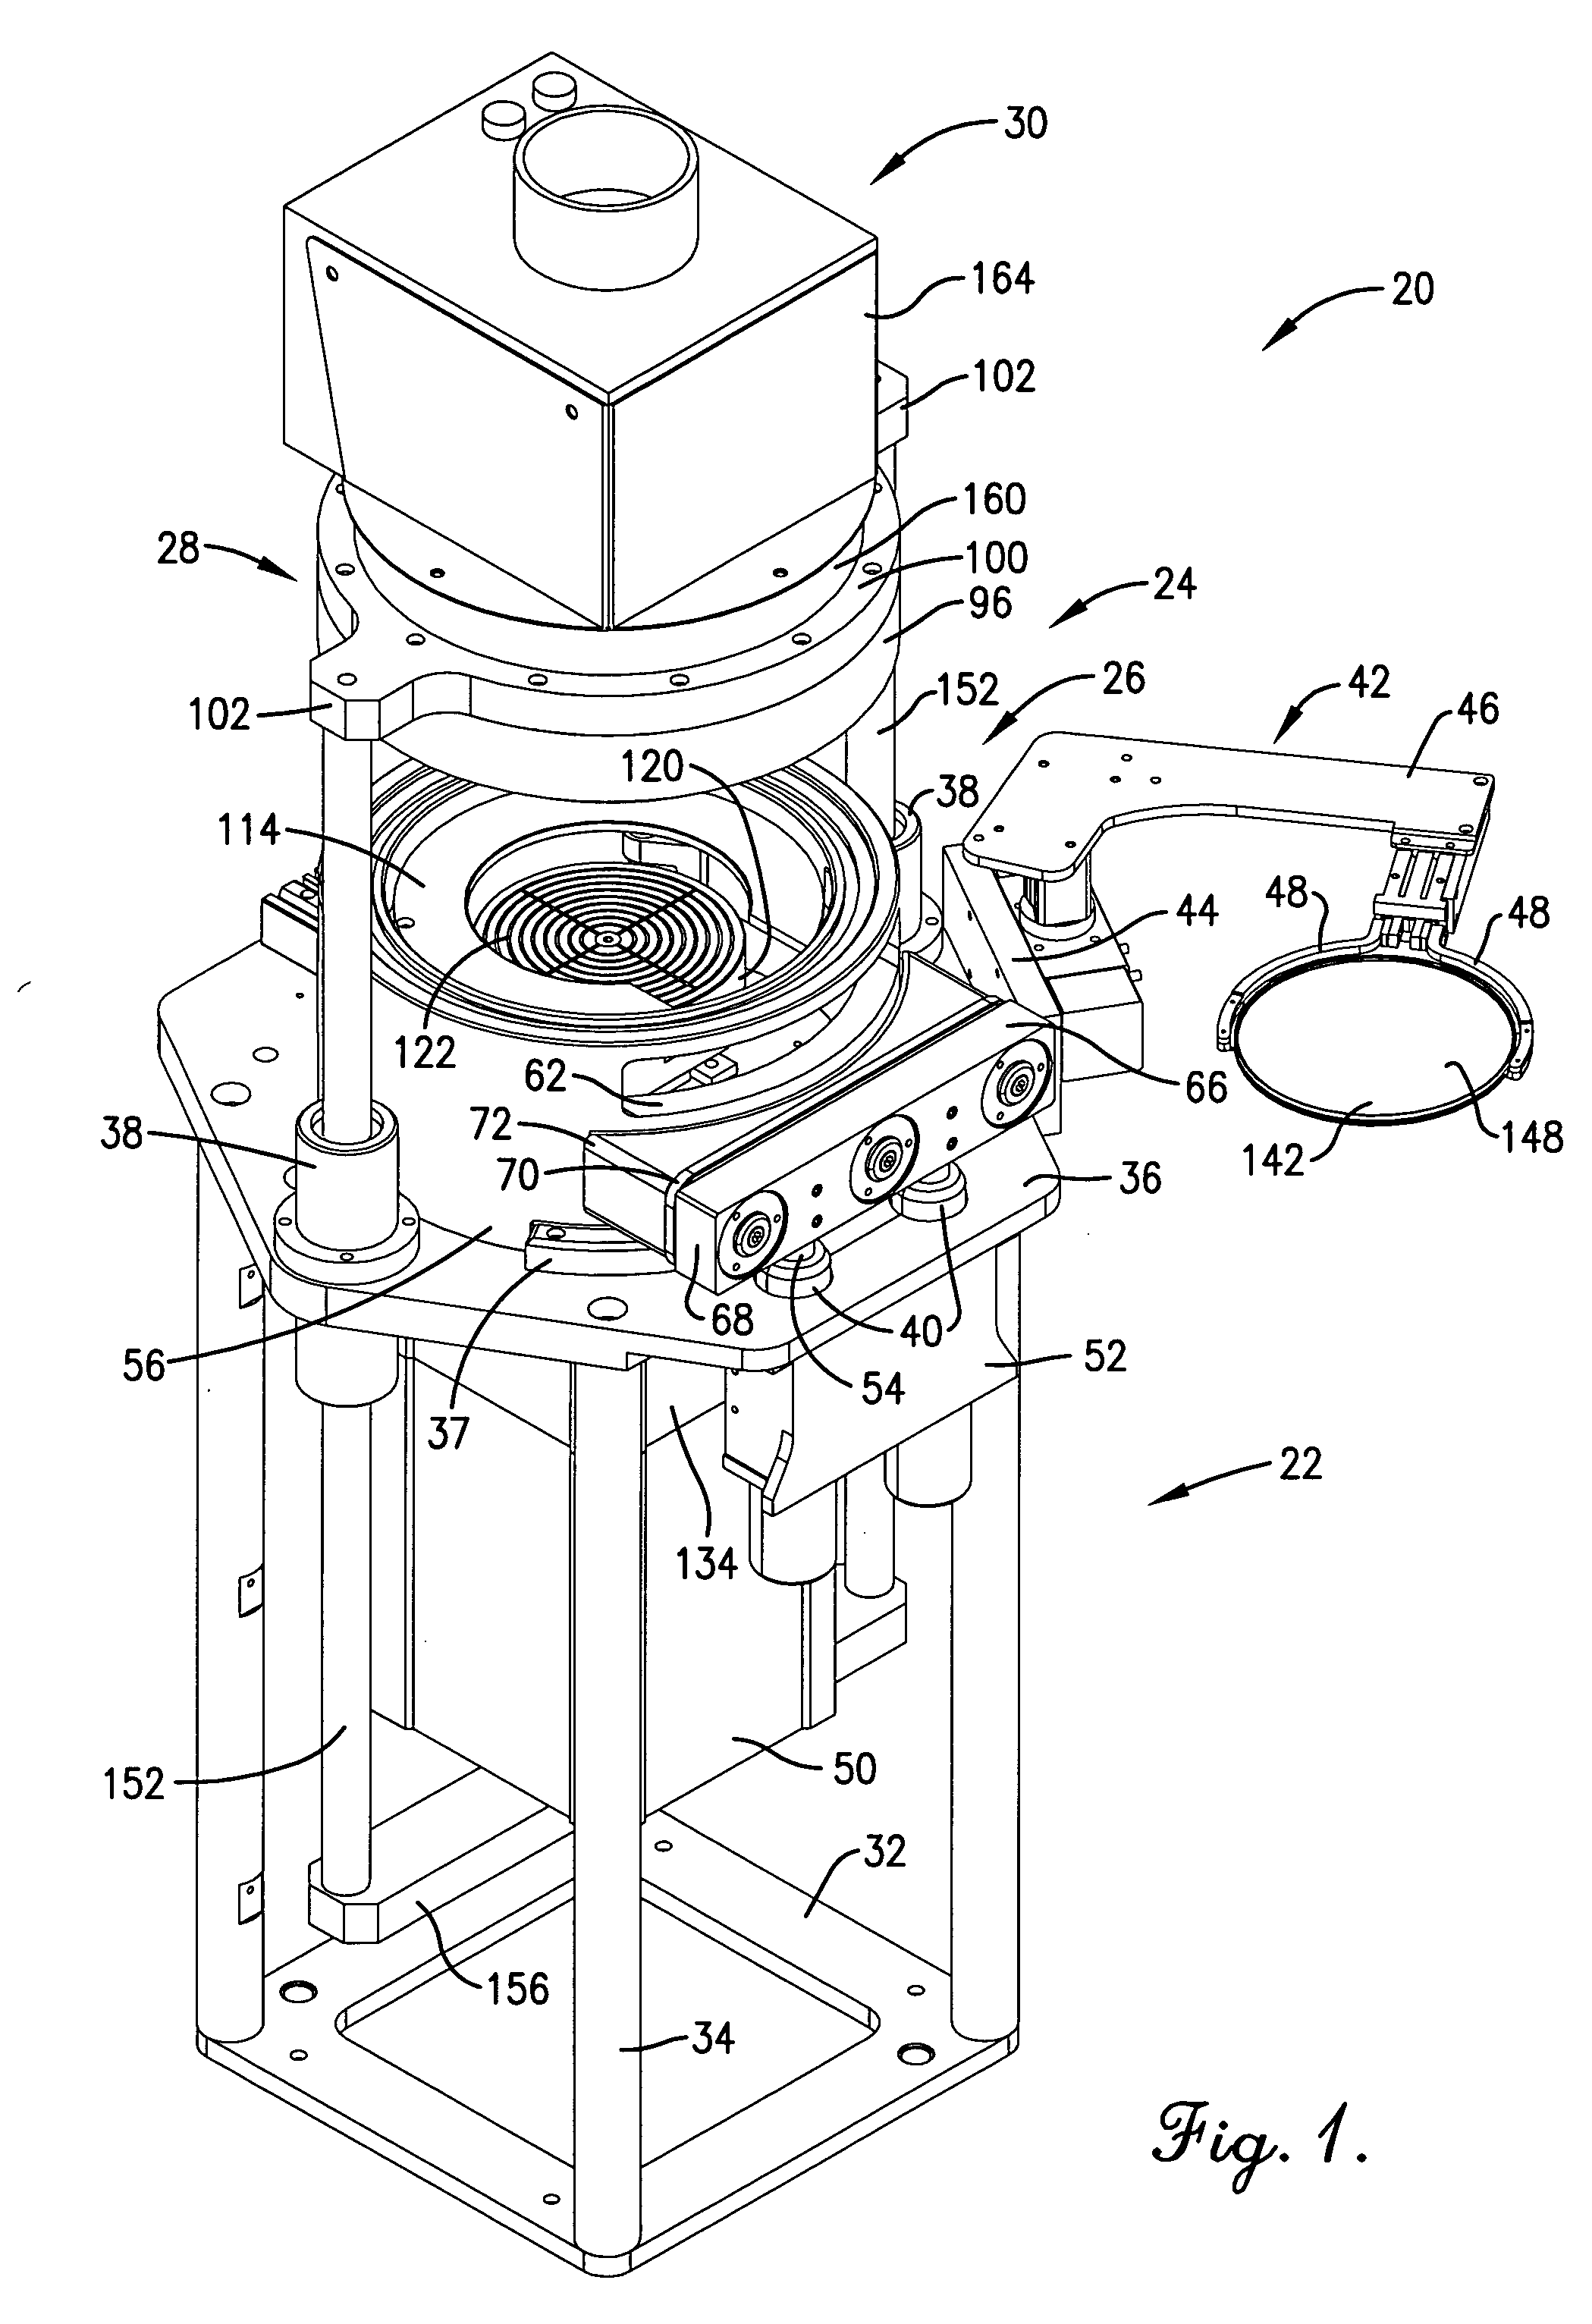 Automated process and apparatus for planarization of topographical surfaces